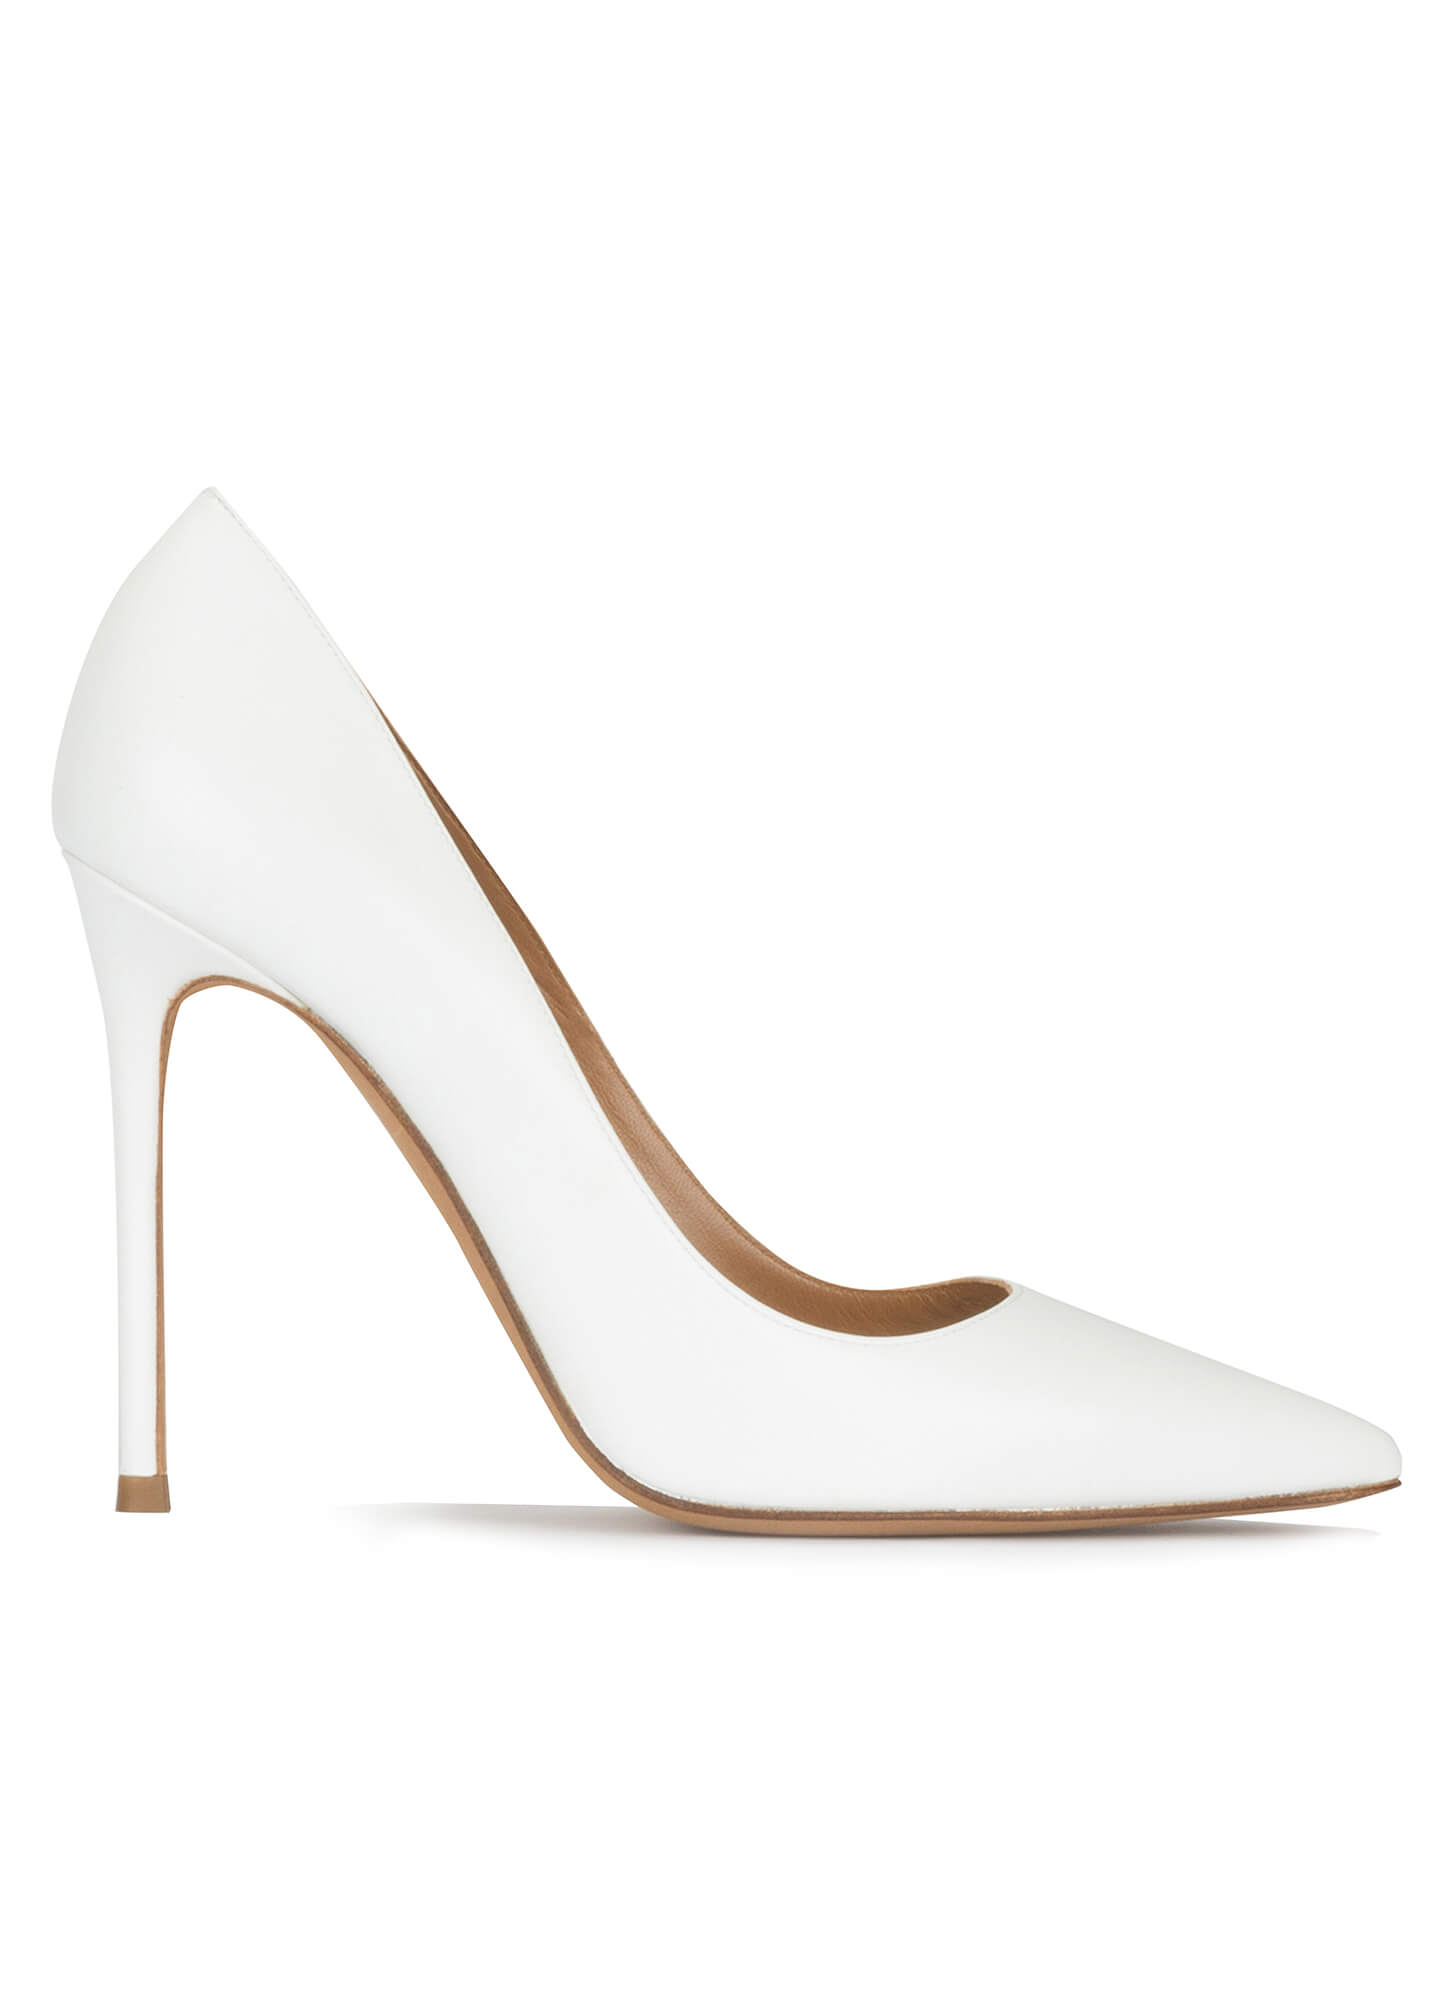 white leather high heel shoes